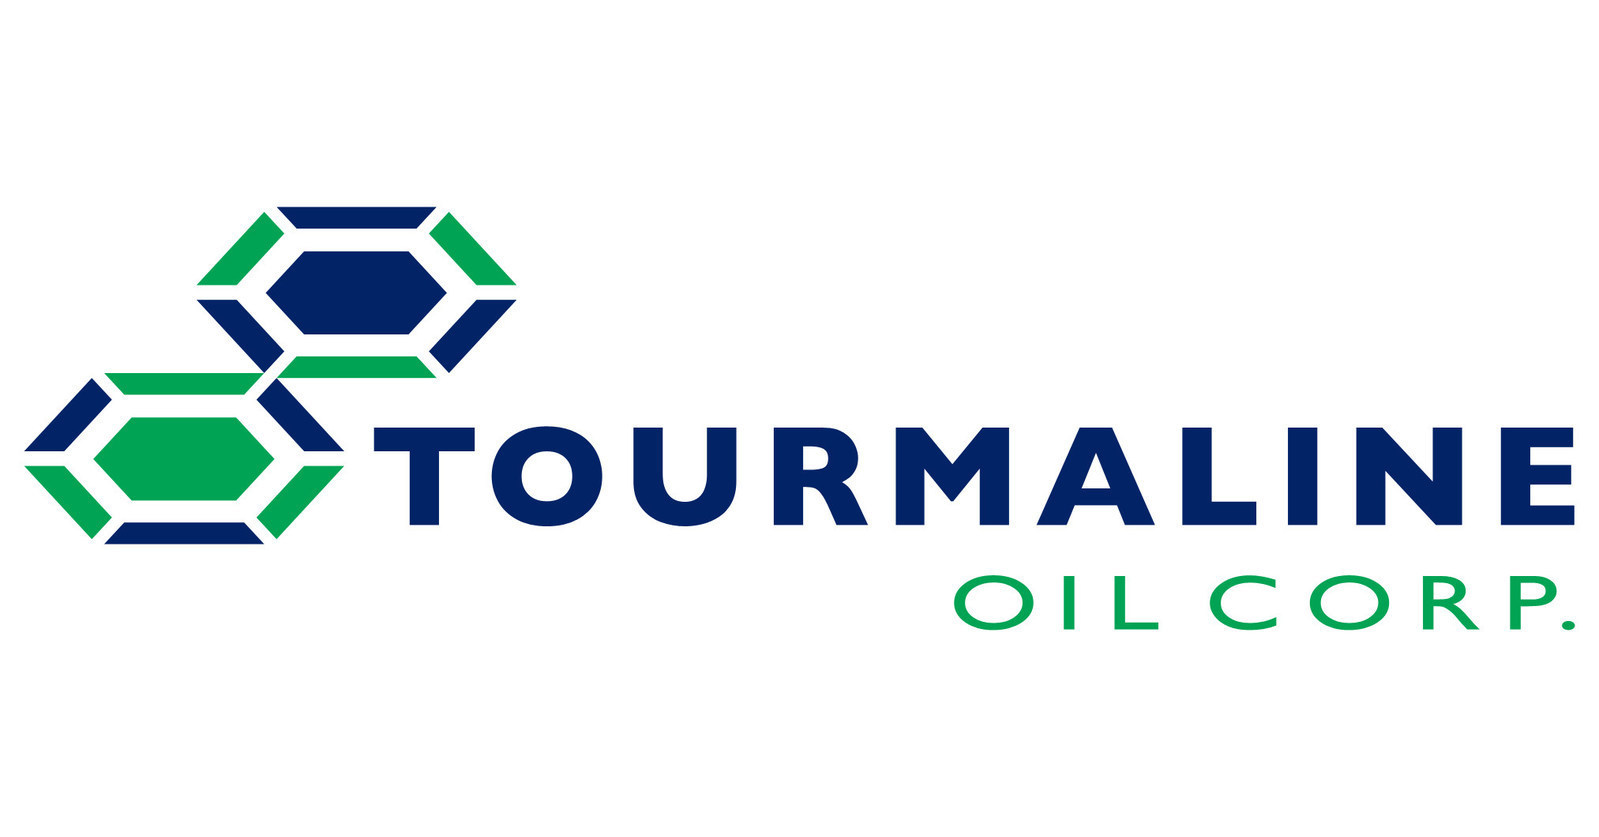 Tourmaline Realizes Strong Q2 Earnings and Continues to Focus on Free